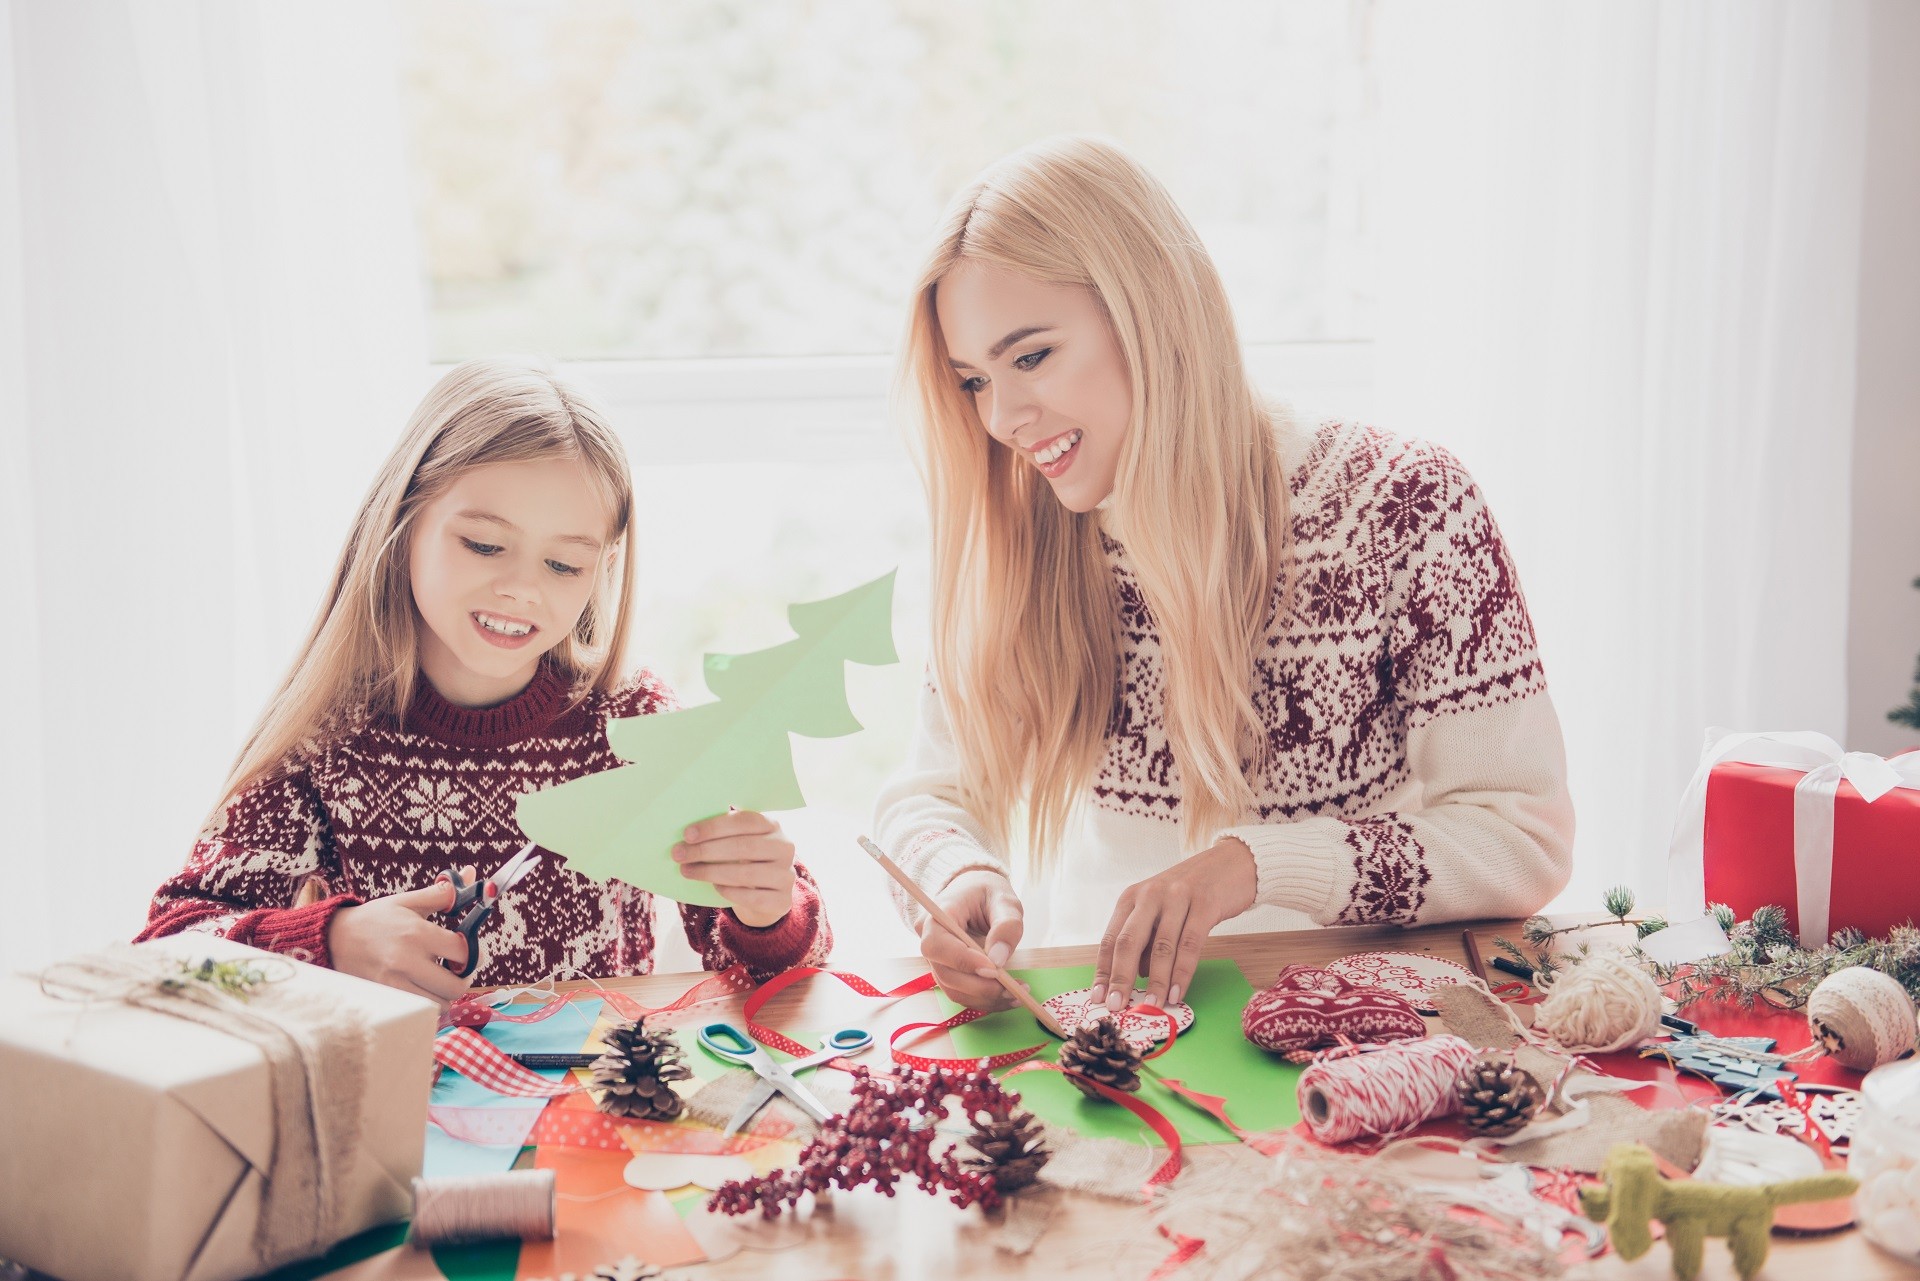 5 Fun and Inexpensive Ideas for Kids Christmas Activities